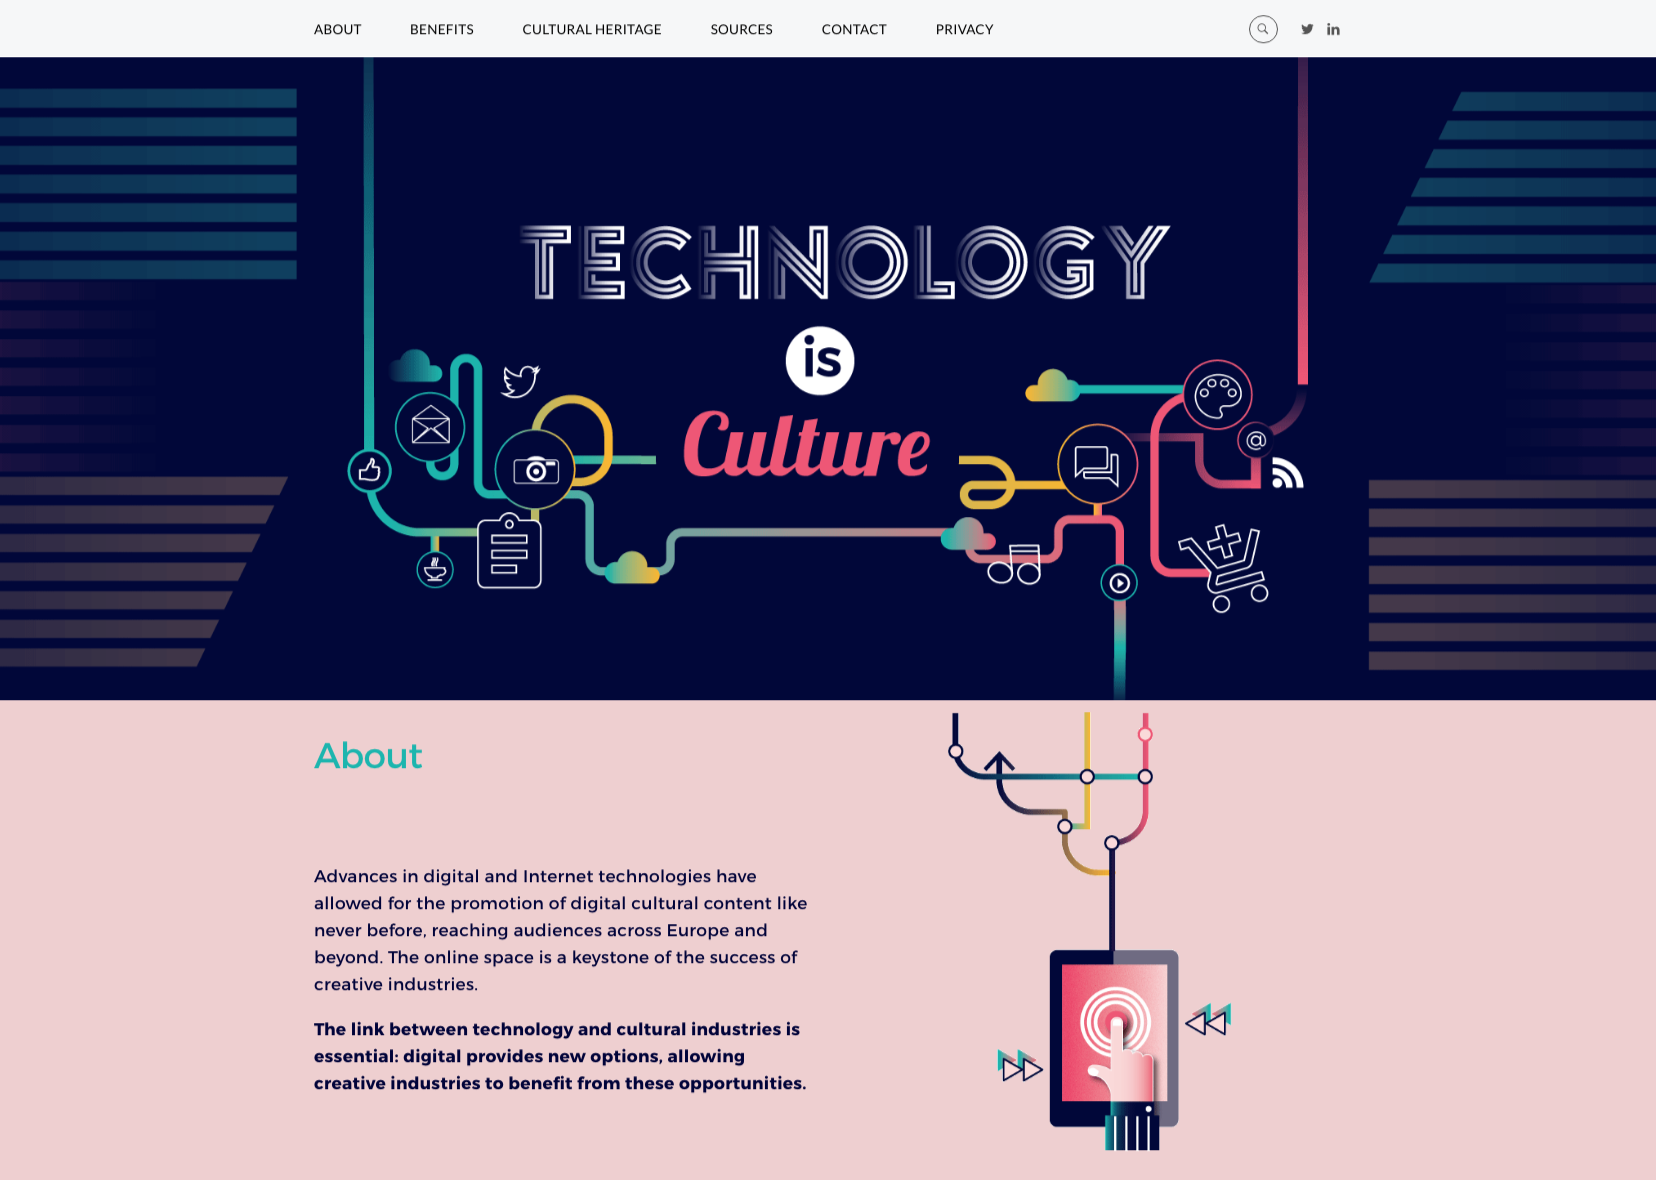 Technology And Culture